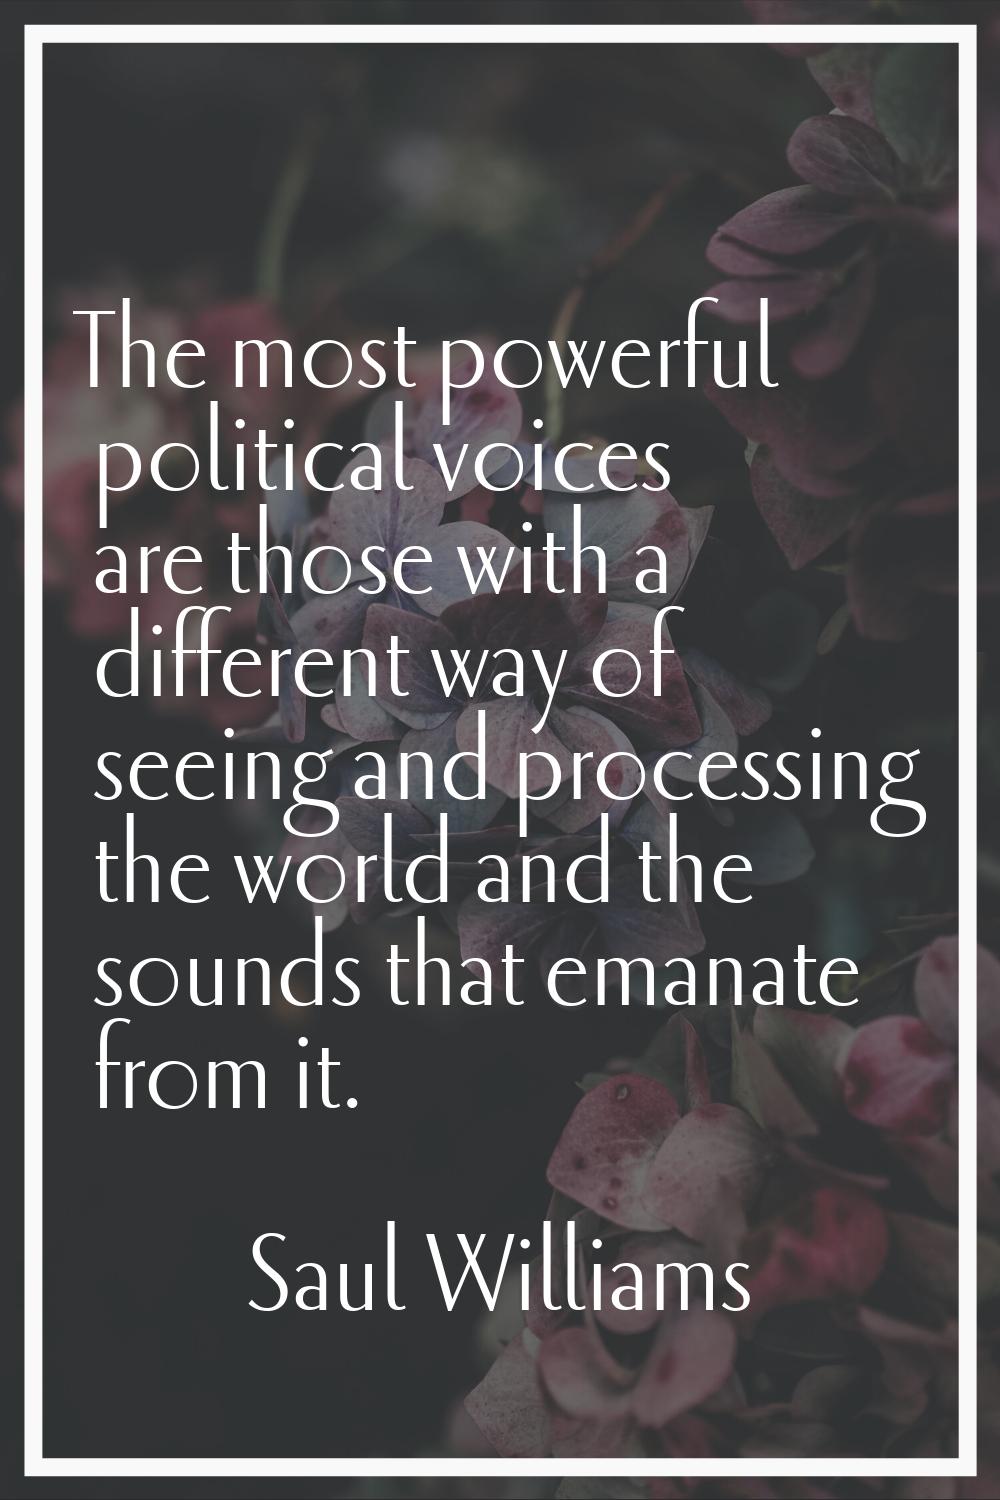 The most powerful political voices are those with a different way of seeing and processing the worl